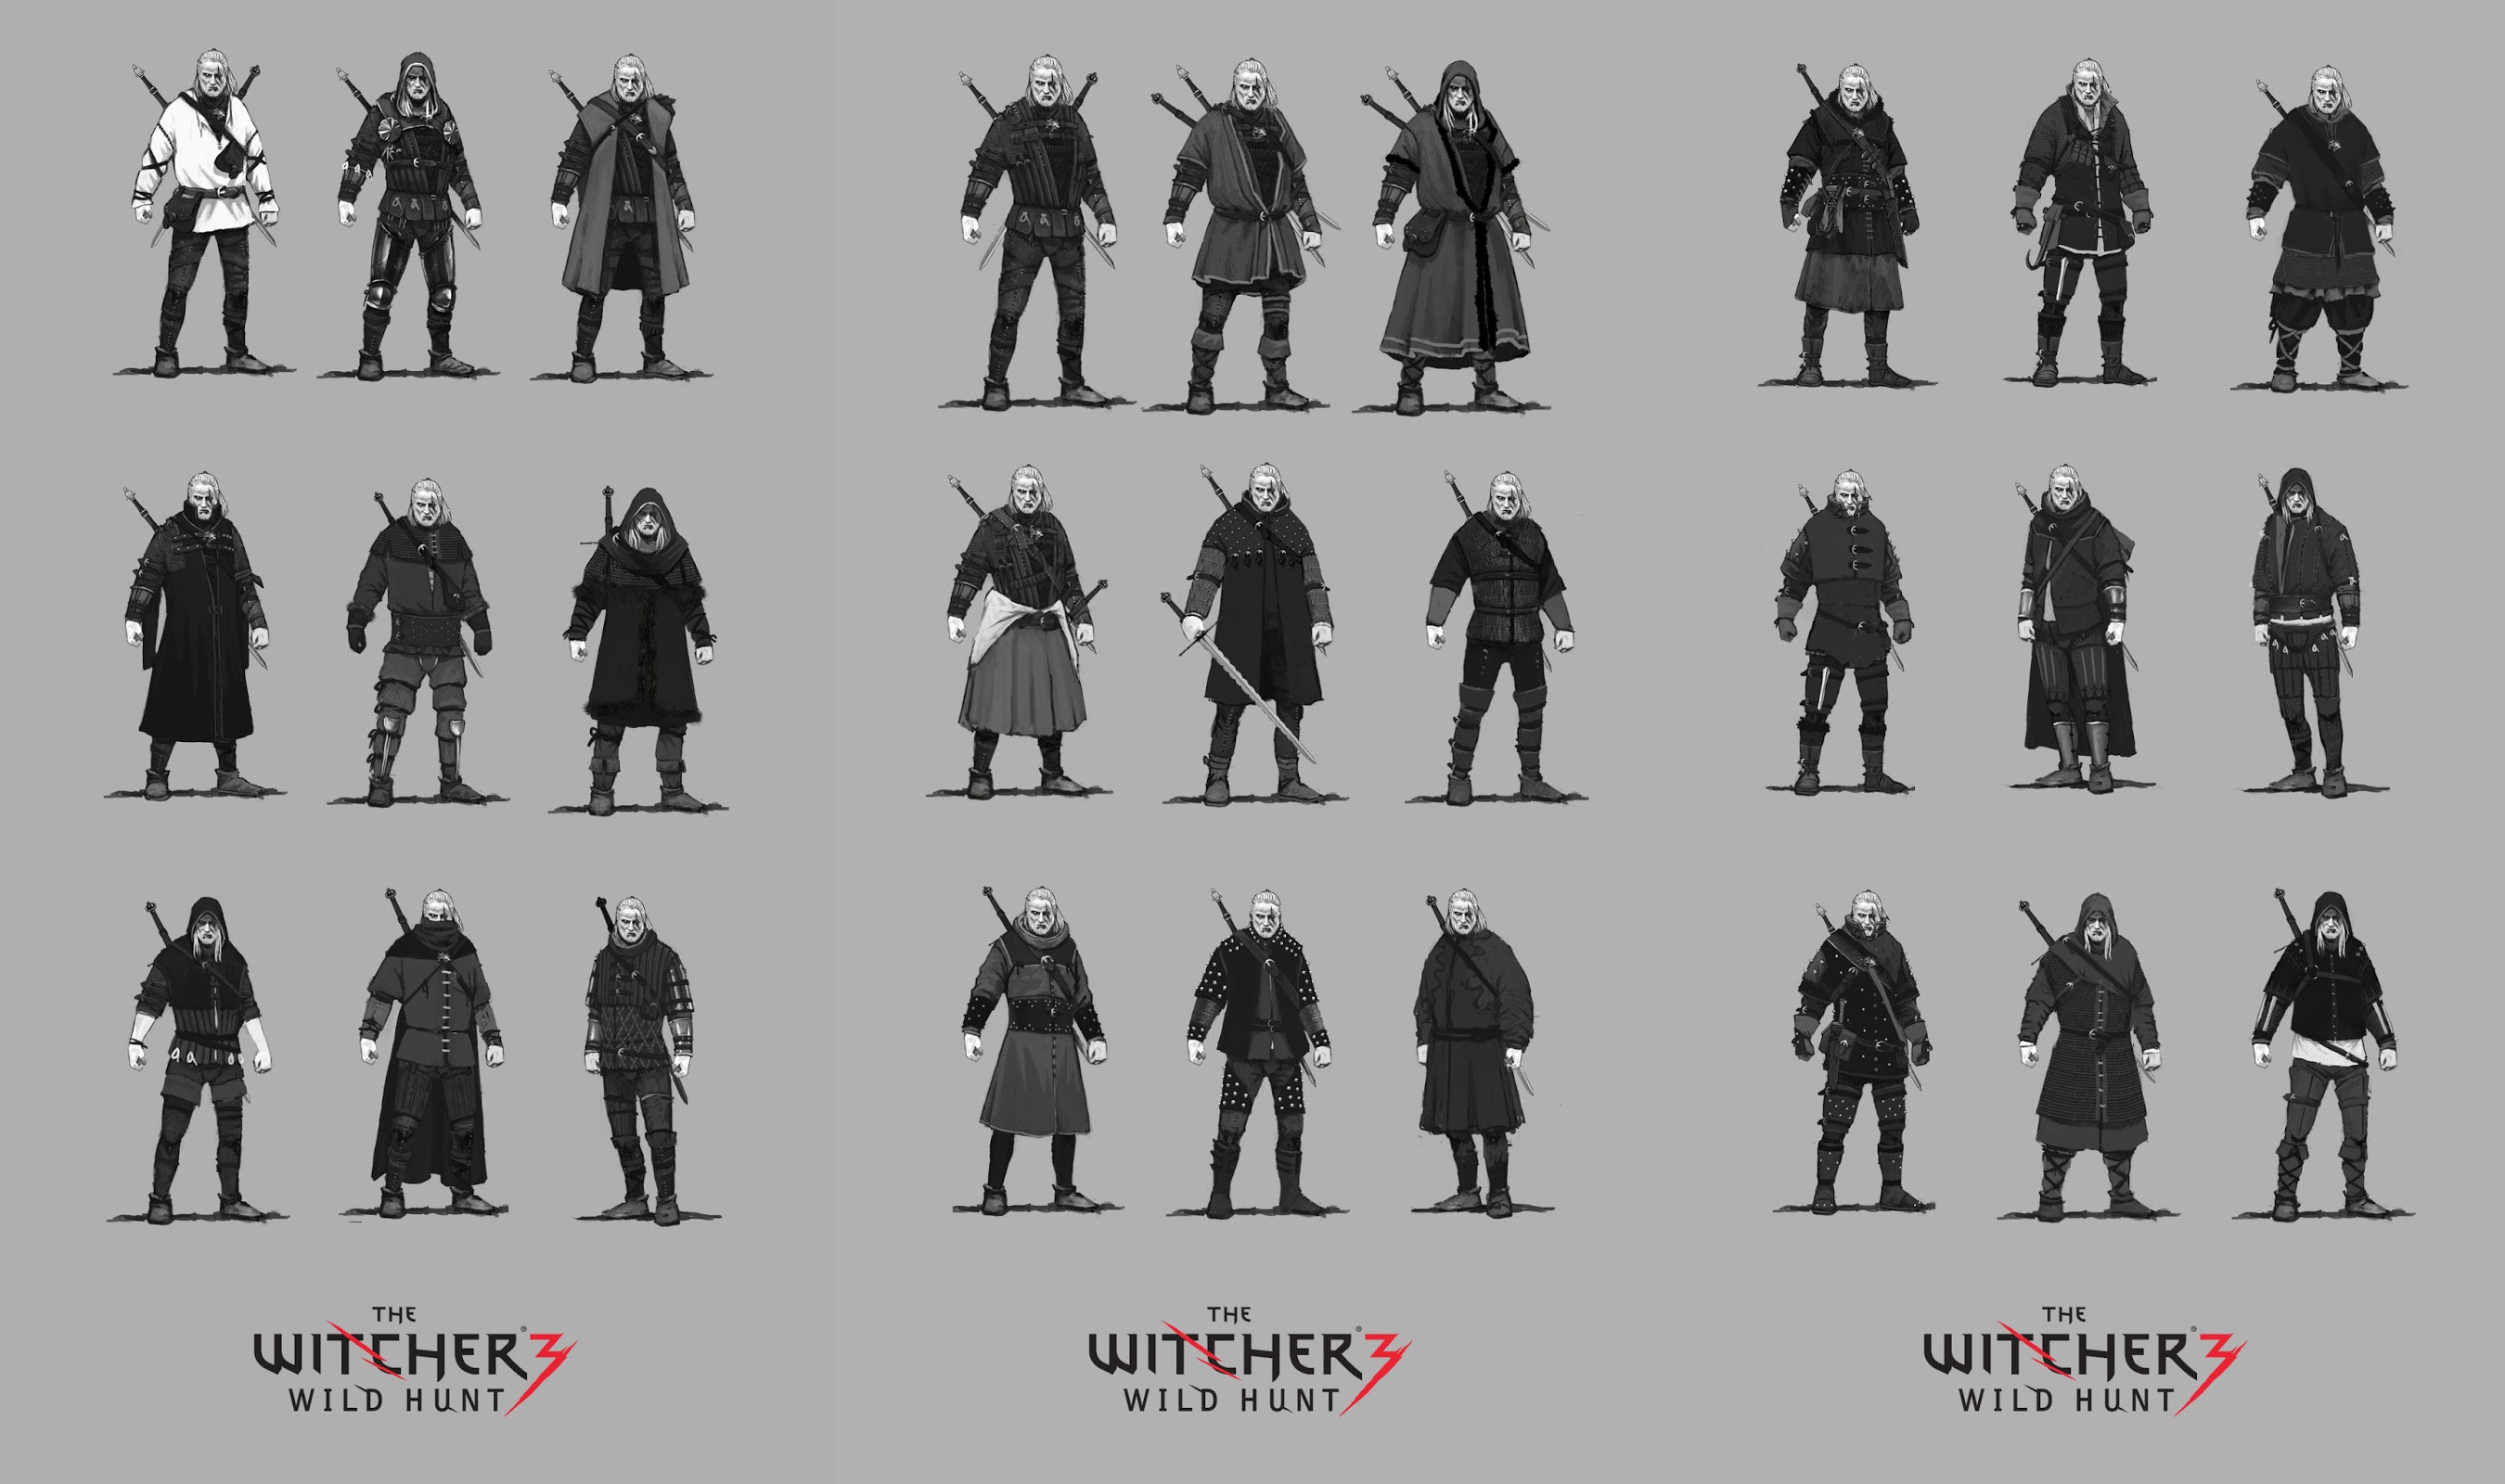 the witcher 3 artwork